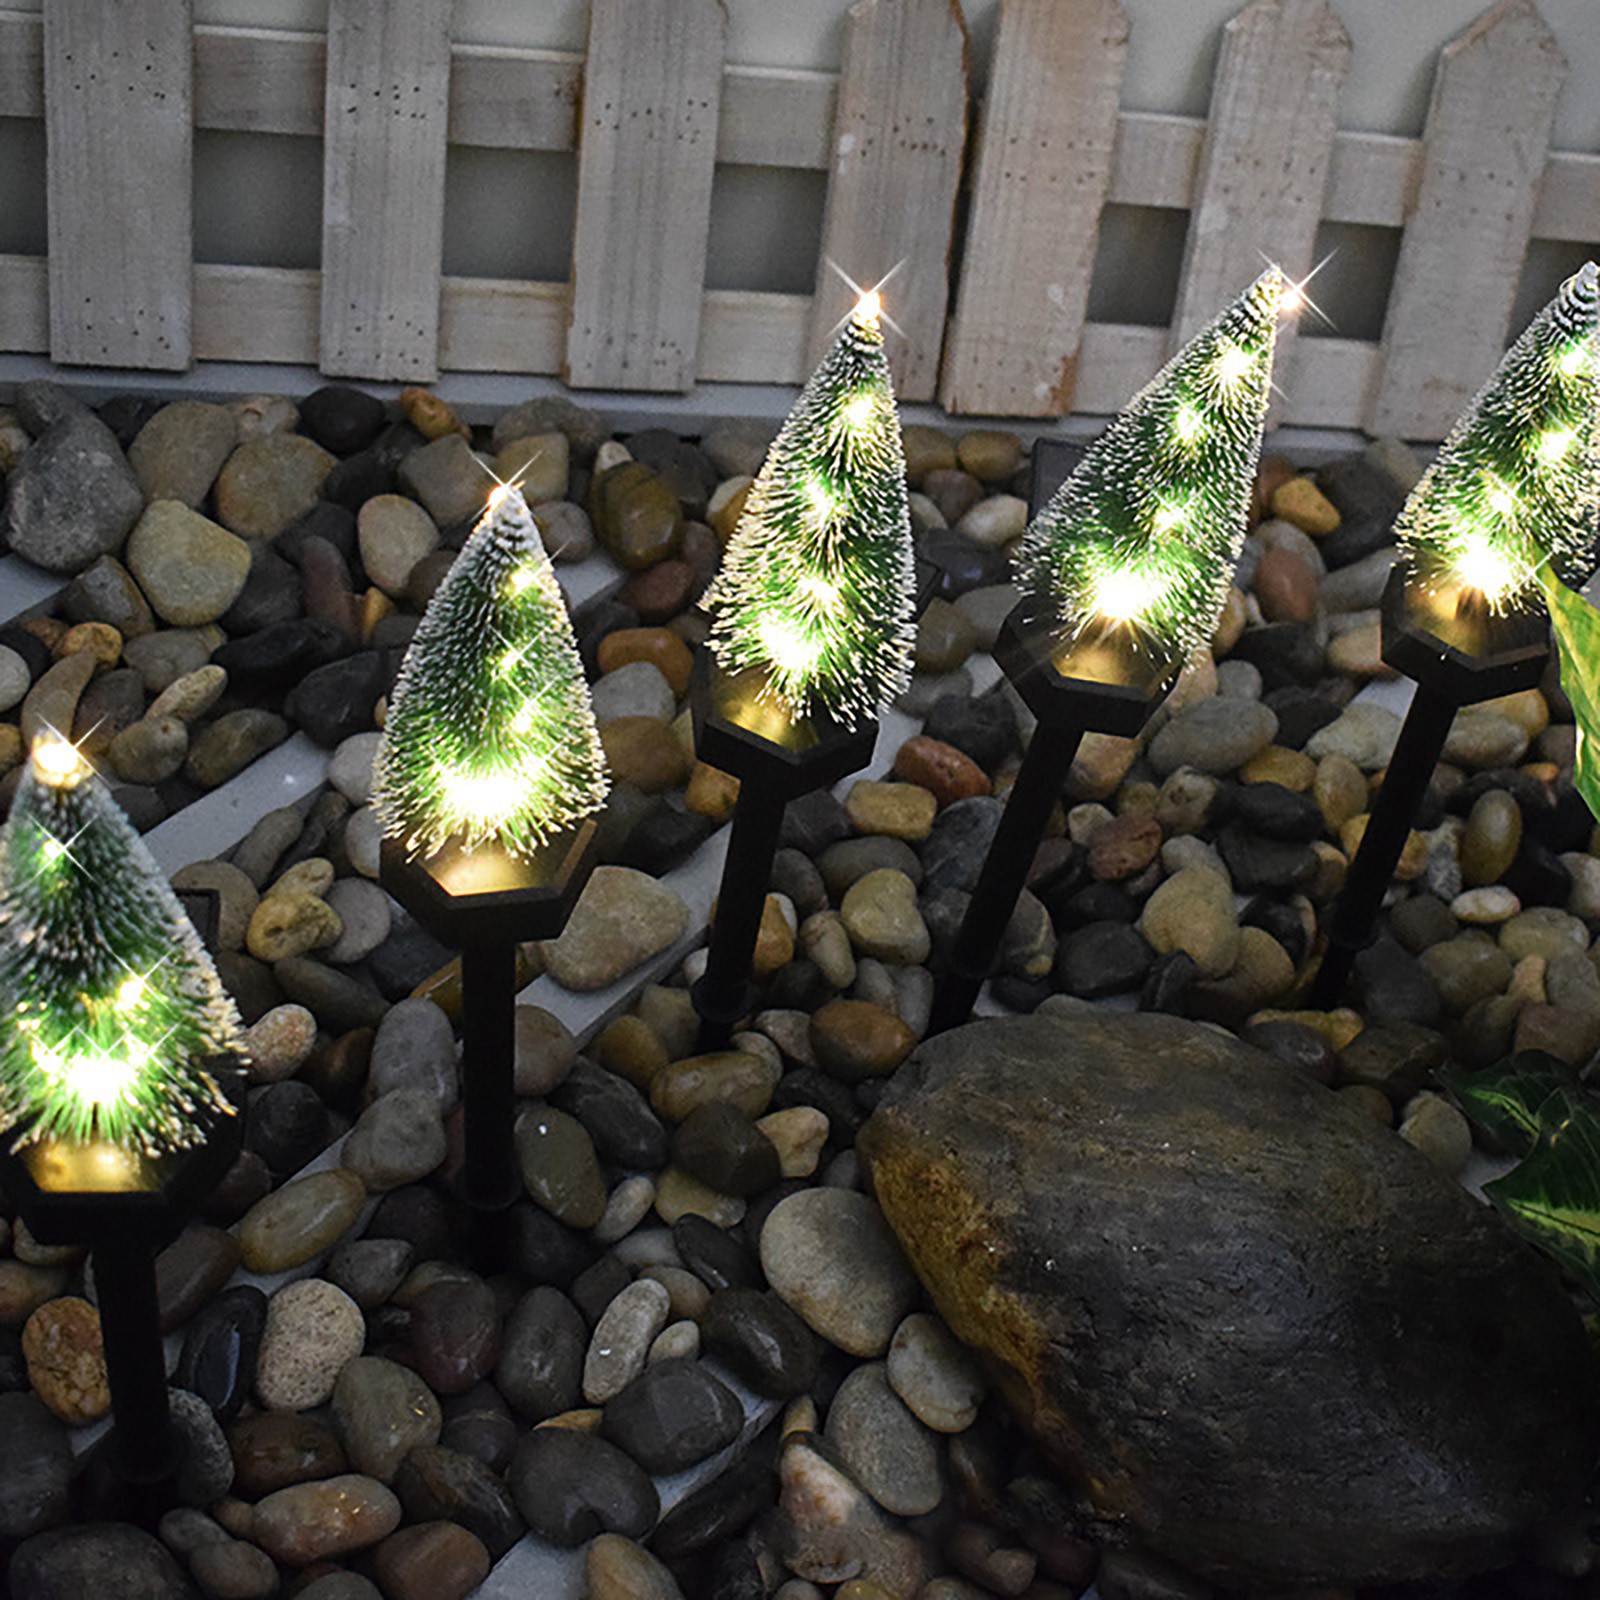 Christmas-Tree-Lights-Led-Solar-Light-For-Garden-Decoration-Lawn-Lamp-Outdoor-Home-Pathway-Bulb-Wate-1918433-8